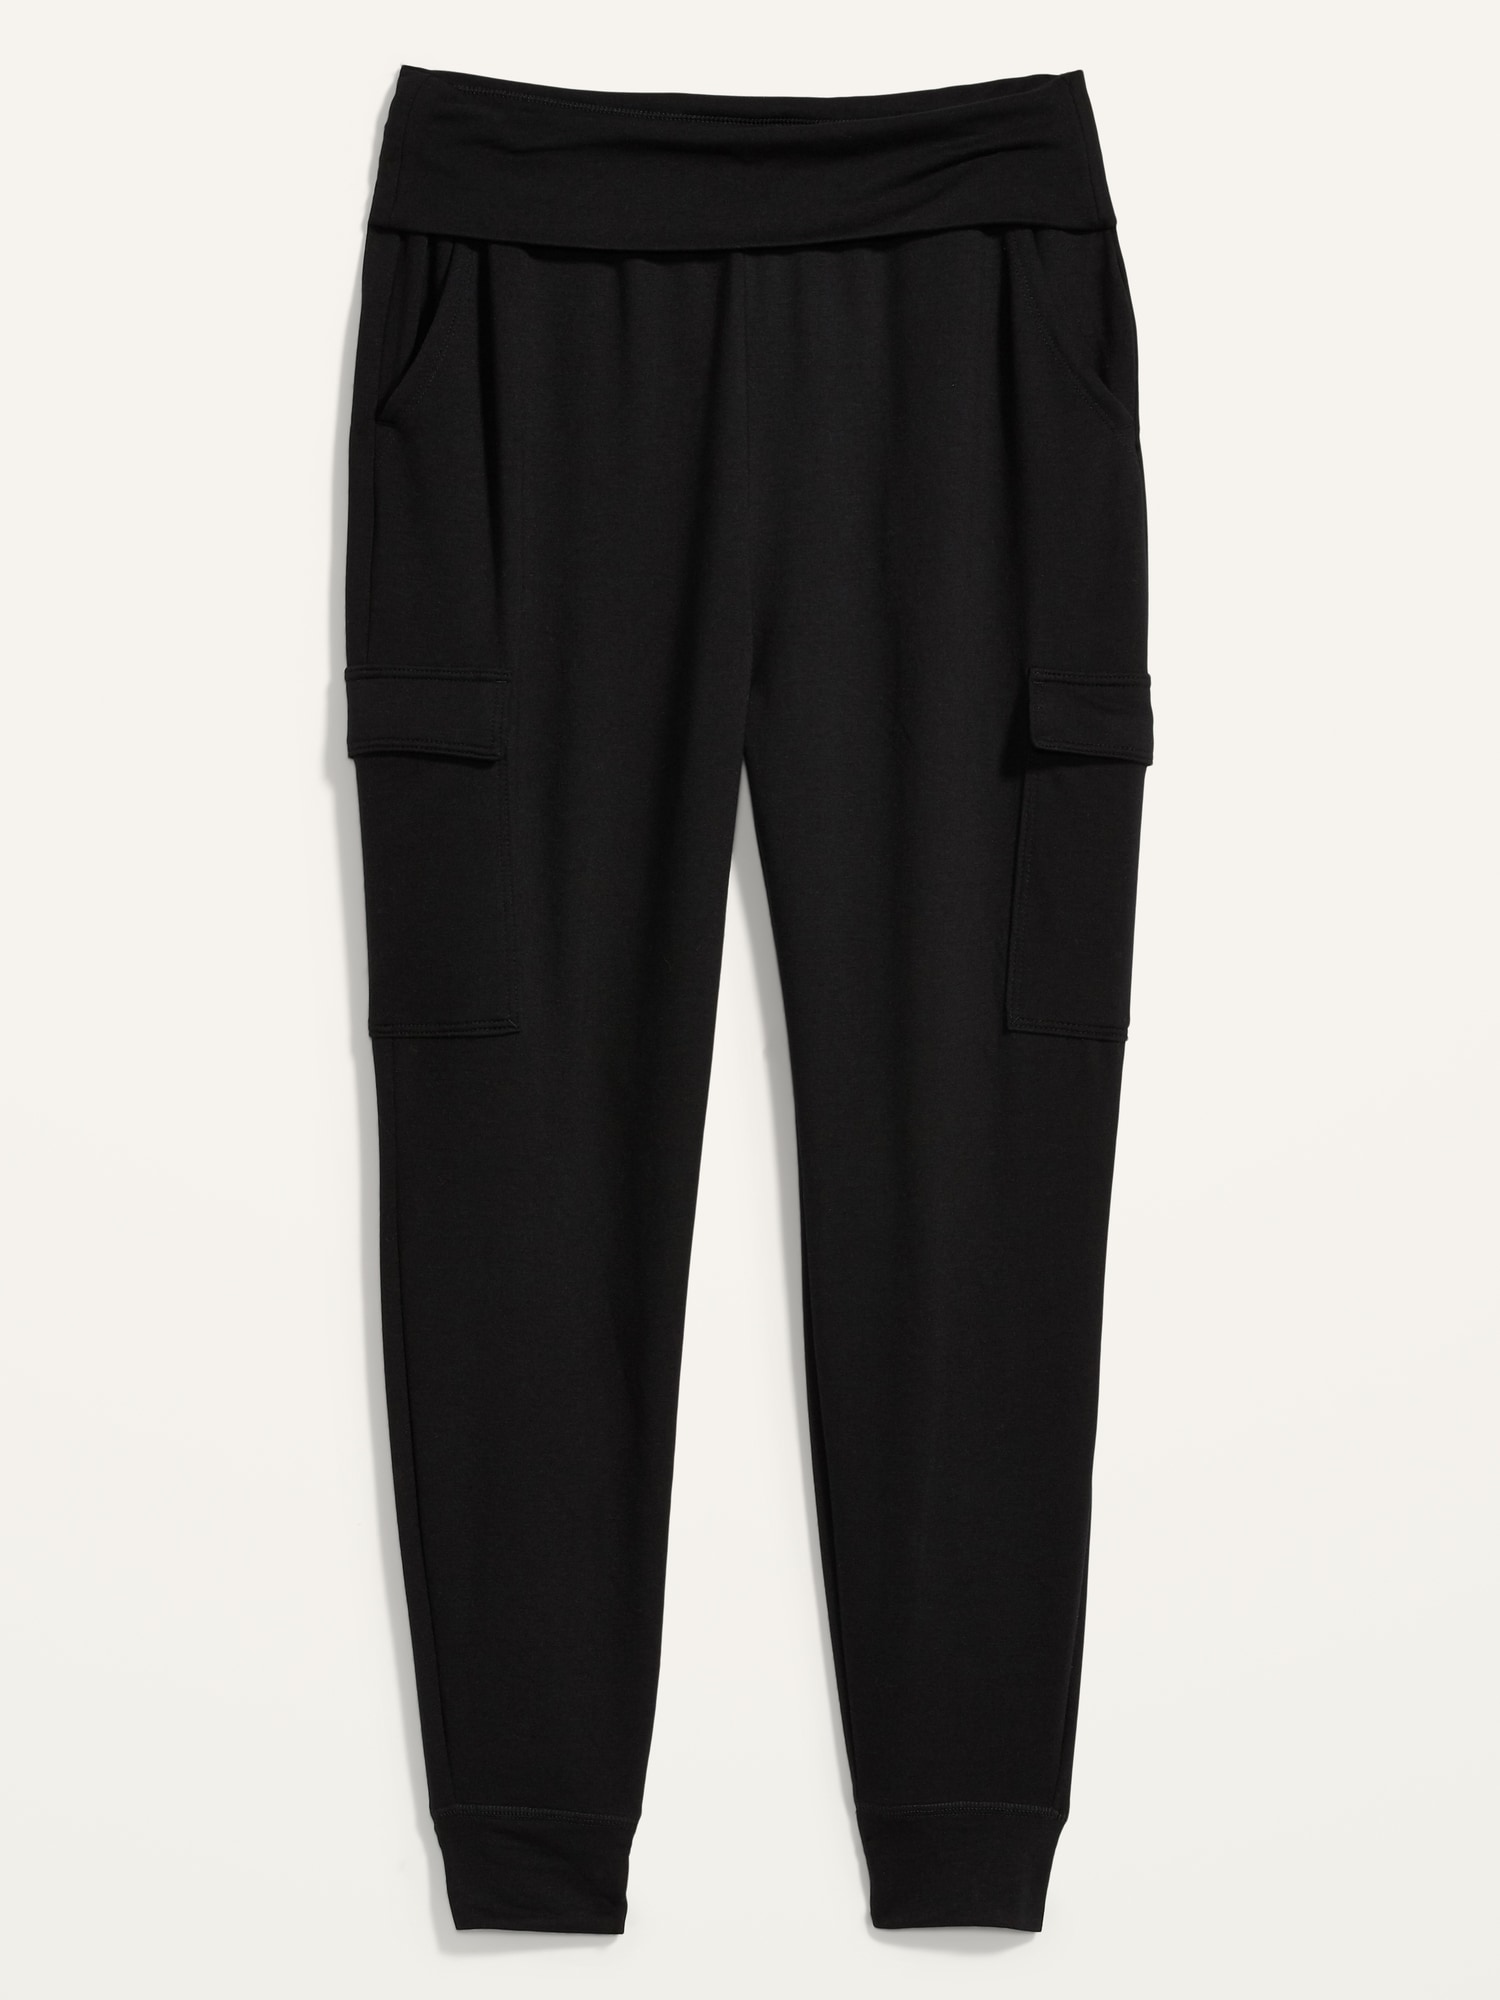 Mid-Rise Live-In Cargo Jogger Sweatpants for Women